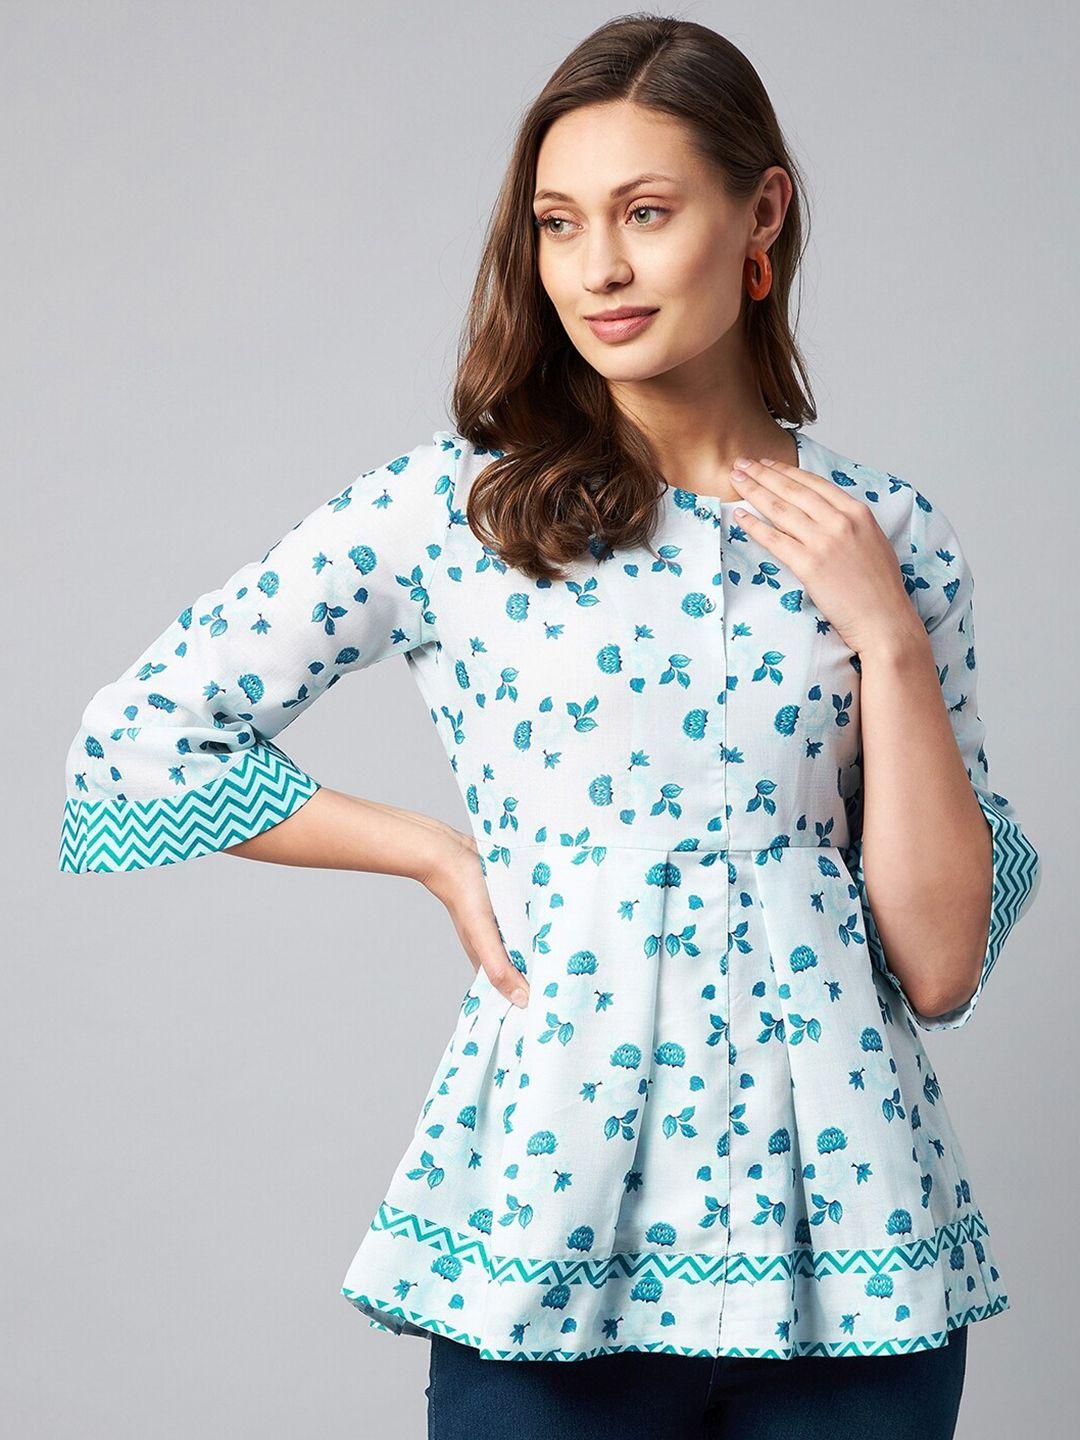 orchid hues blue floral print top